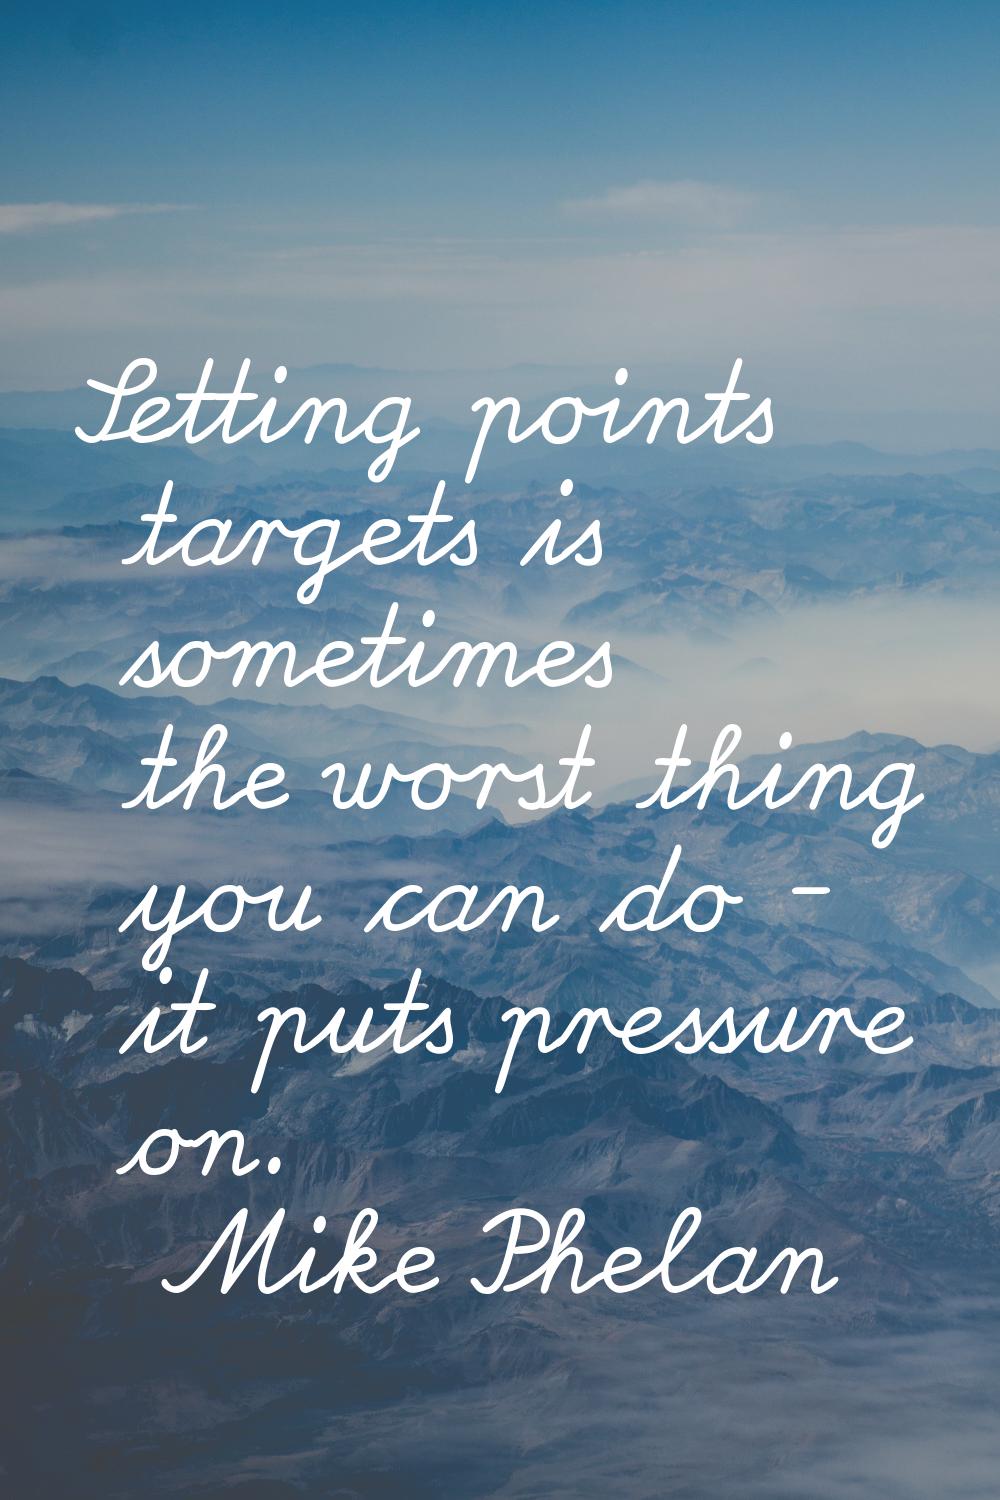 Setting points targets is sometimes the worst thing you can do - it puts pressure on.